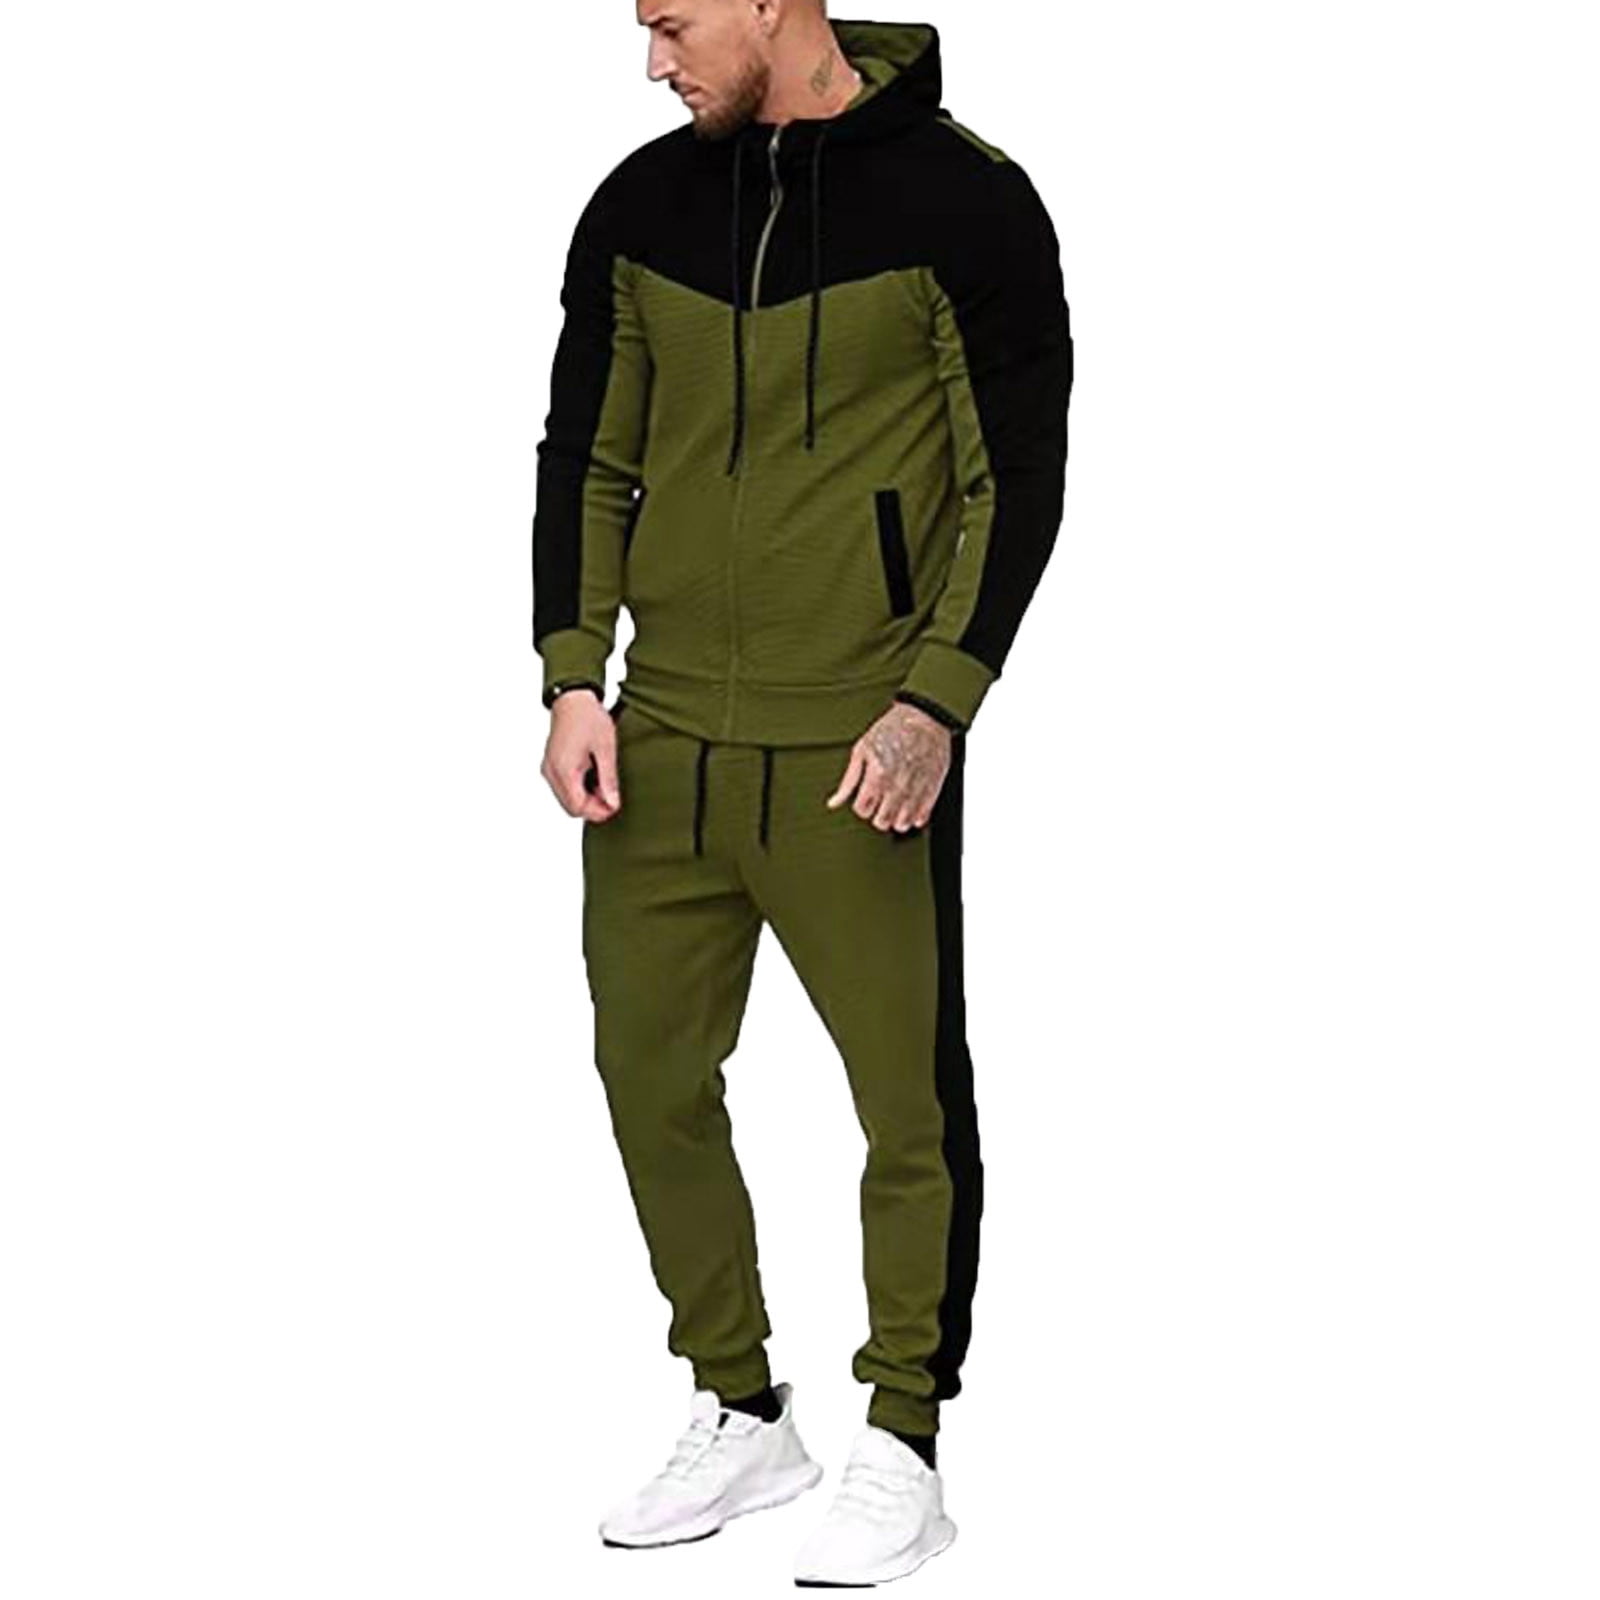 Men's Casual Tracksuit Long Sleeve Sweatsuit Athletic Set Full Zip Running  Jogging Suits for Men Sports Jacket and Pants 